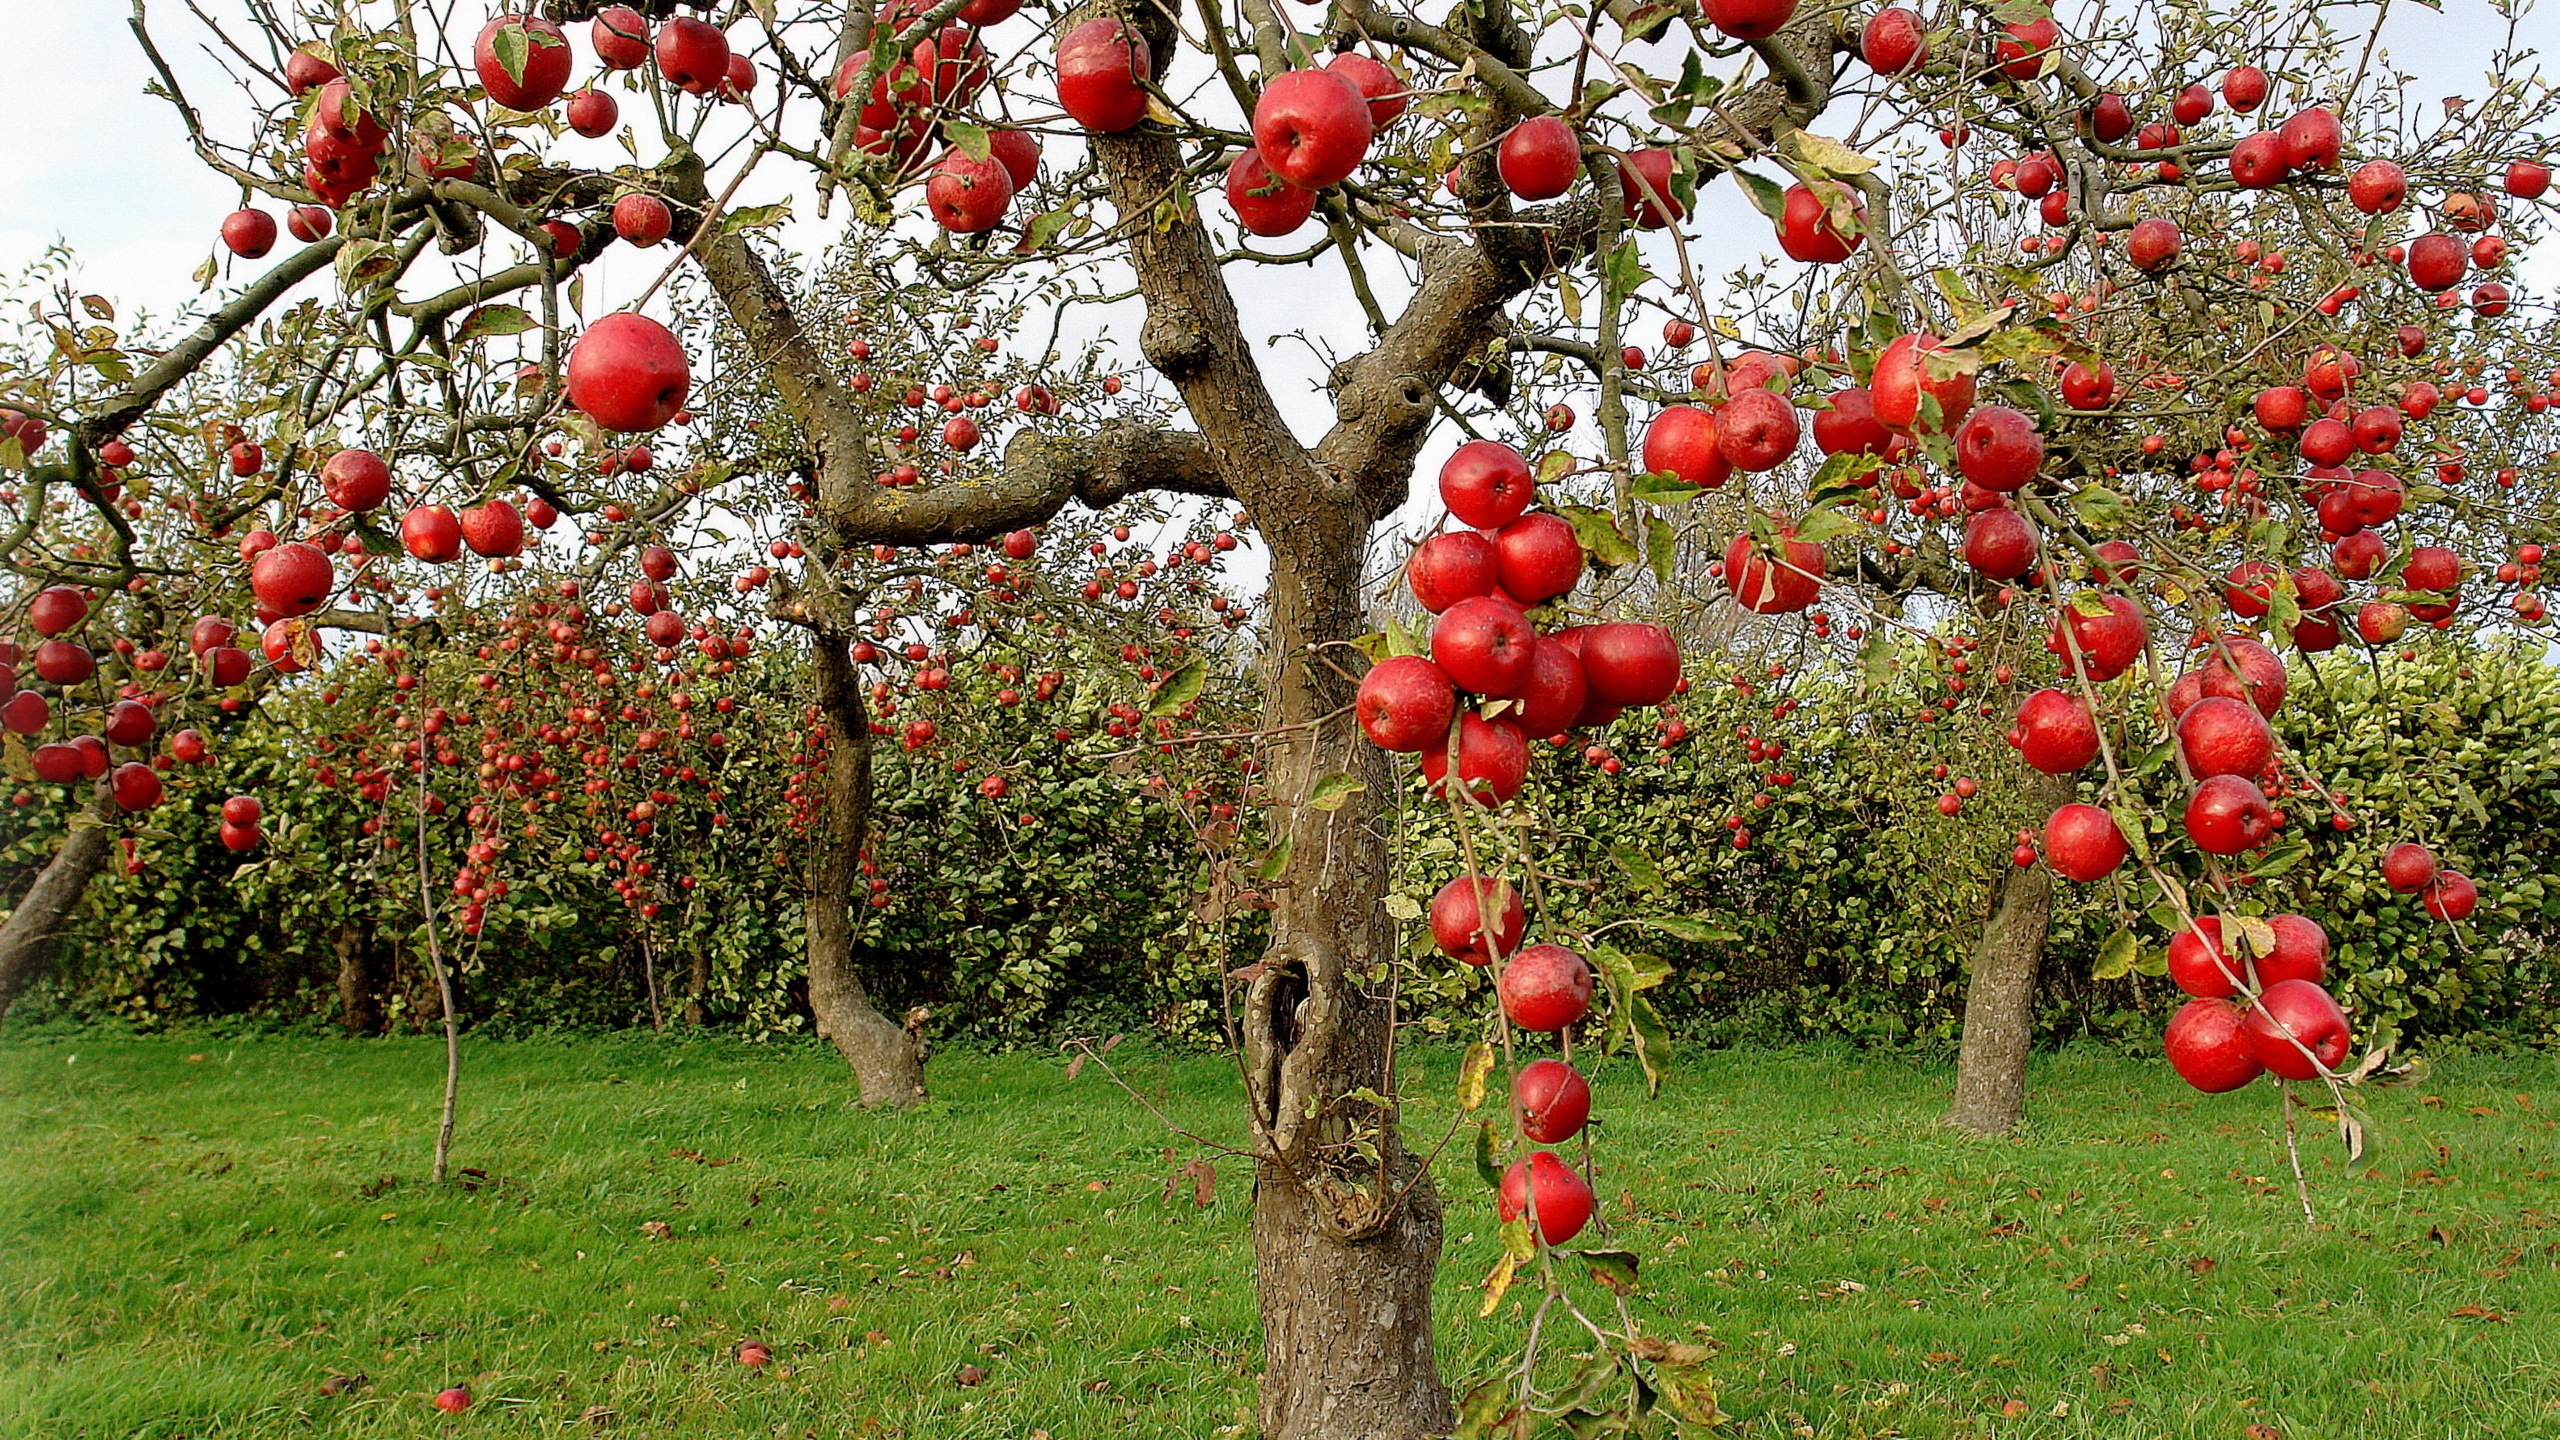 Autumn Red Apples for 2560x1440 HDTV resolution